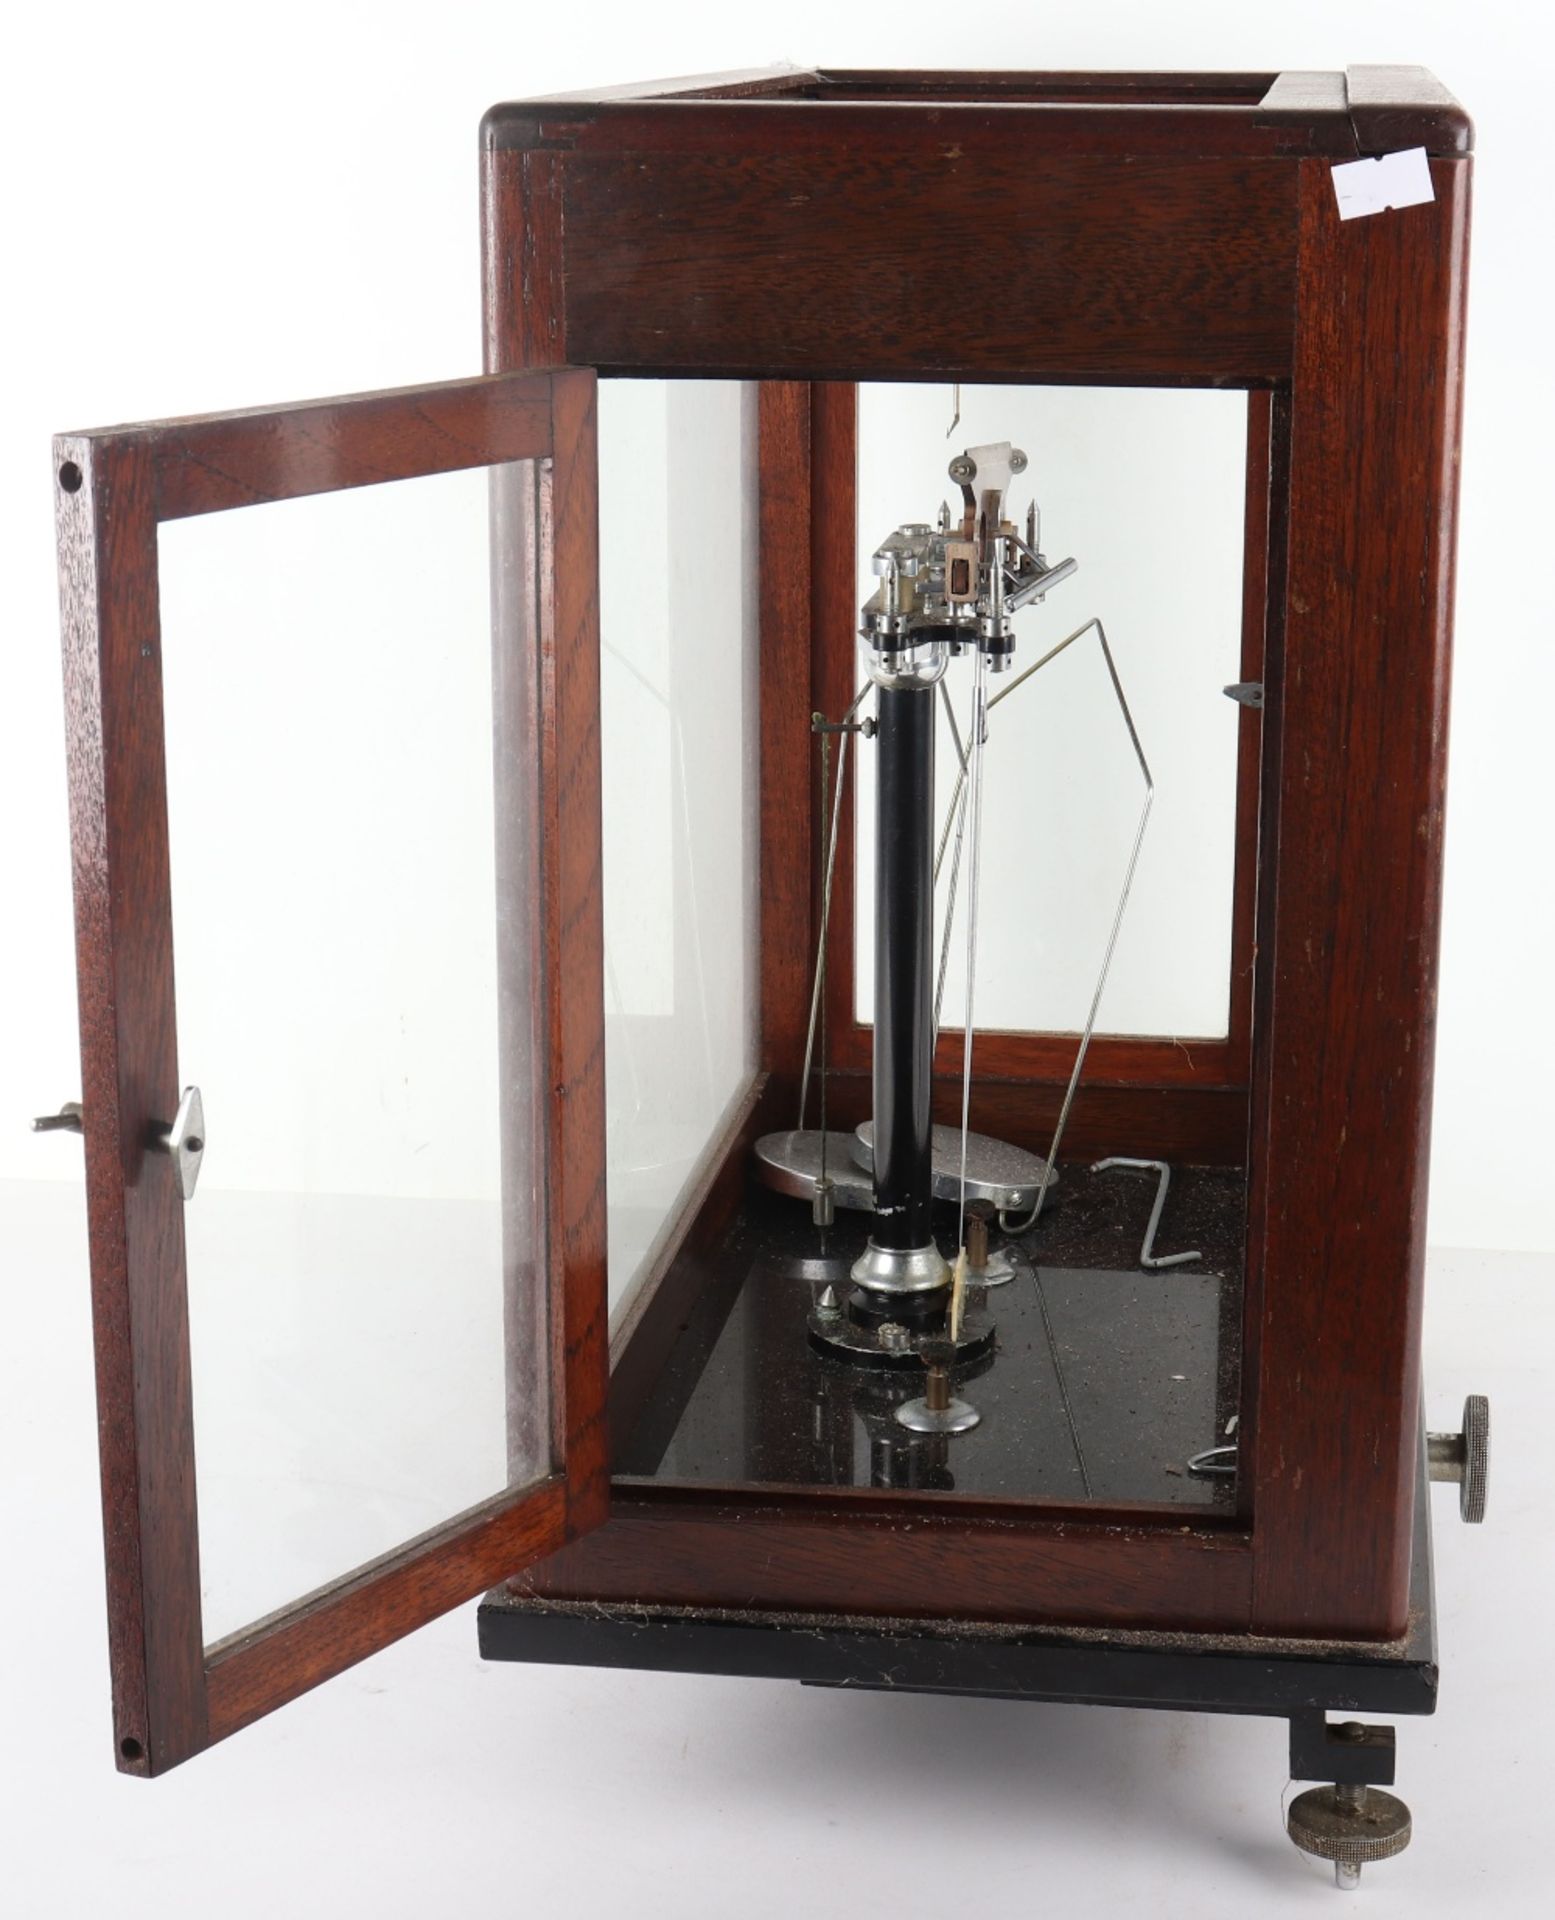 A Townson & Mercer set of scales, in glass, oak and mahogany case - Image 9 of 10